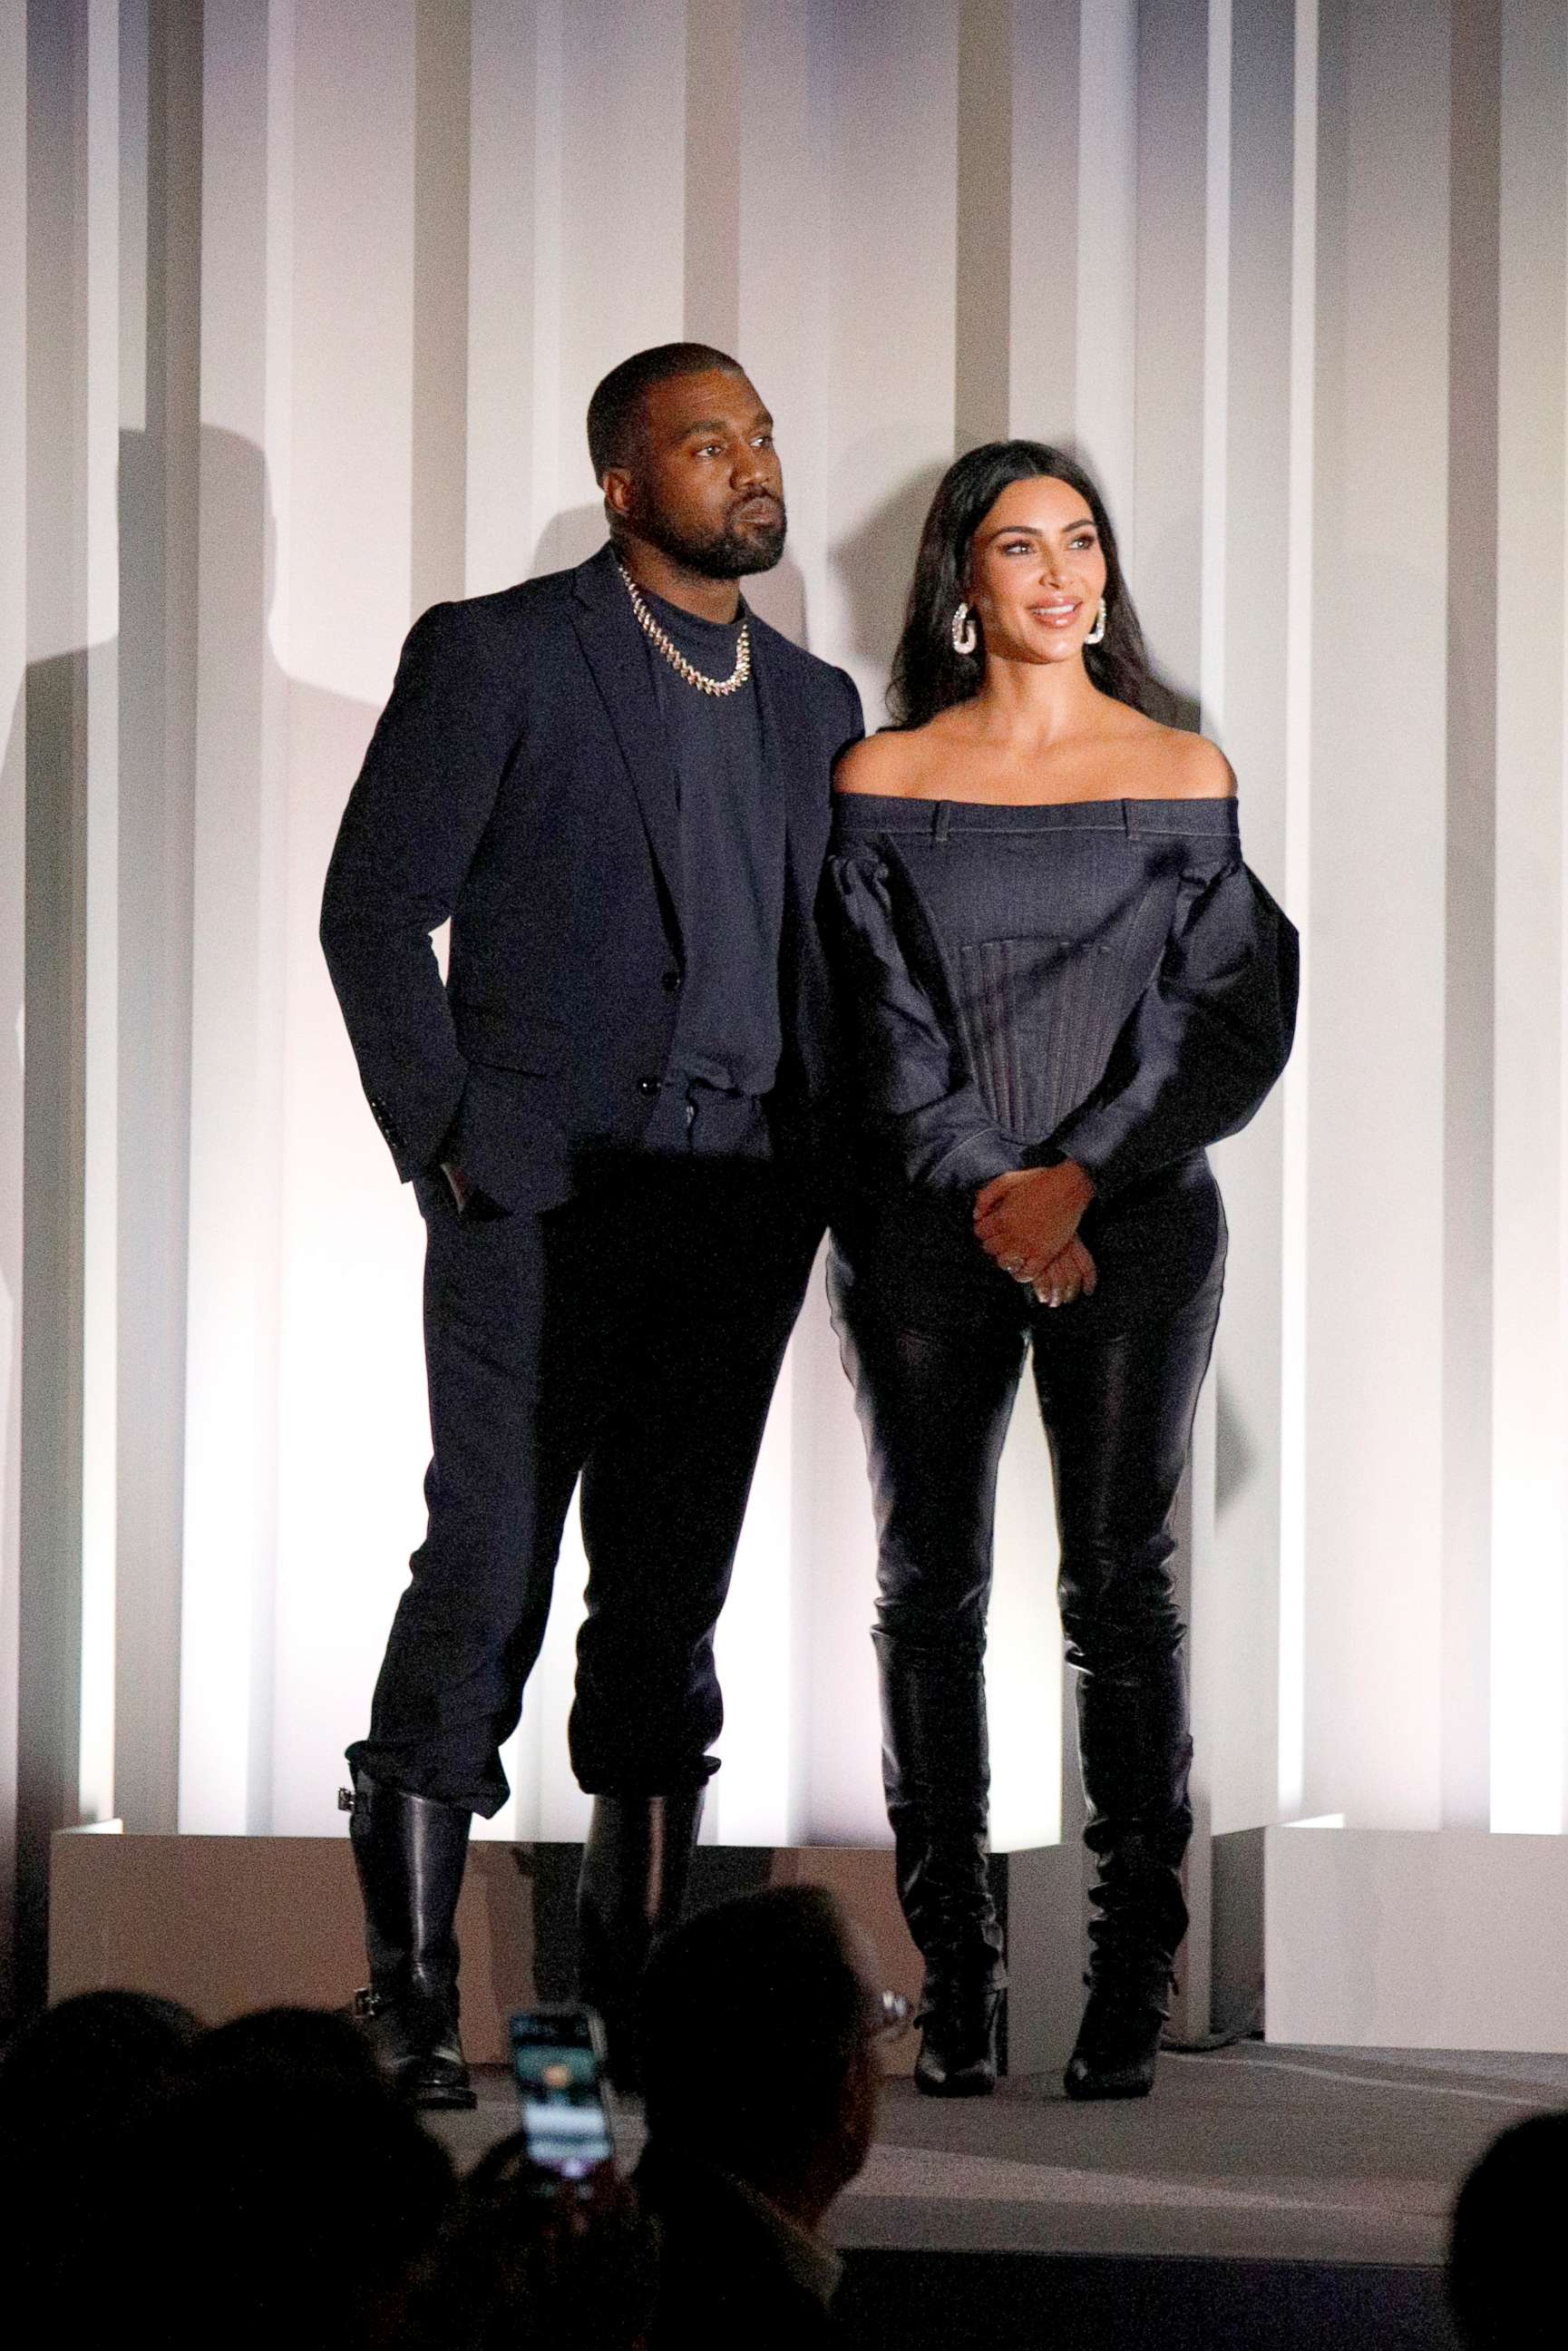 PHOTO: Kanye West and Kim Kardashian West during an event at the Museum of Modern Art in New Yorik, Nov. 06, 2019.